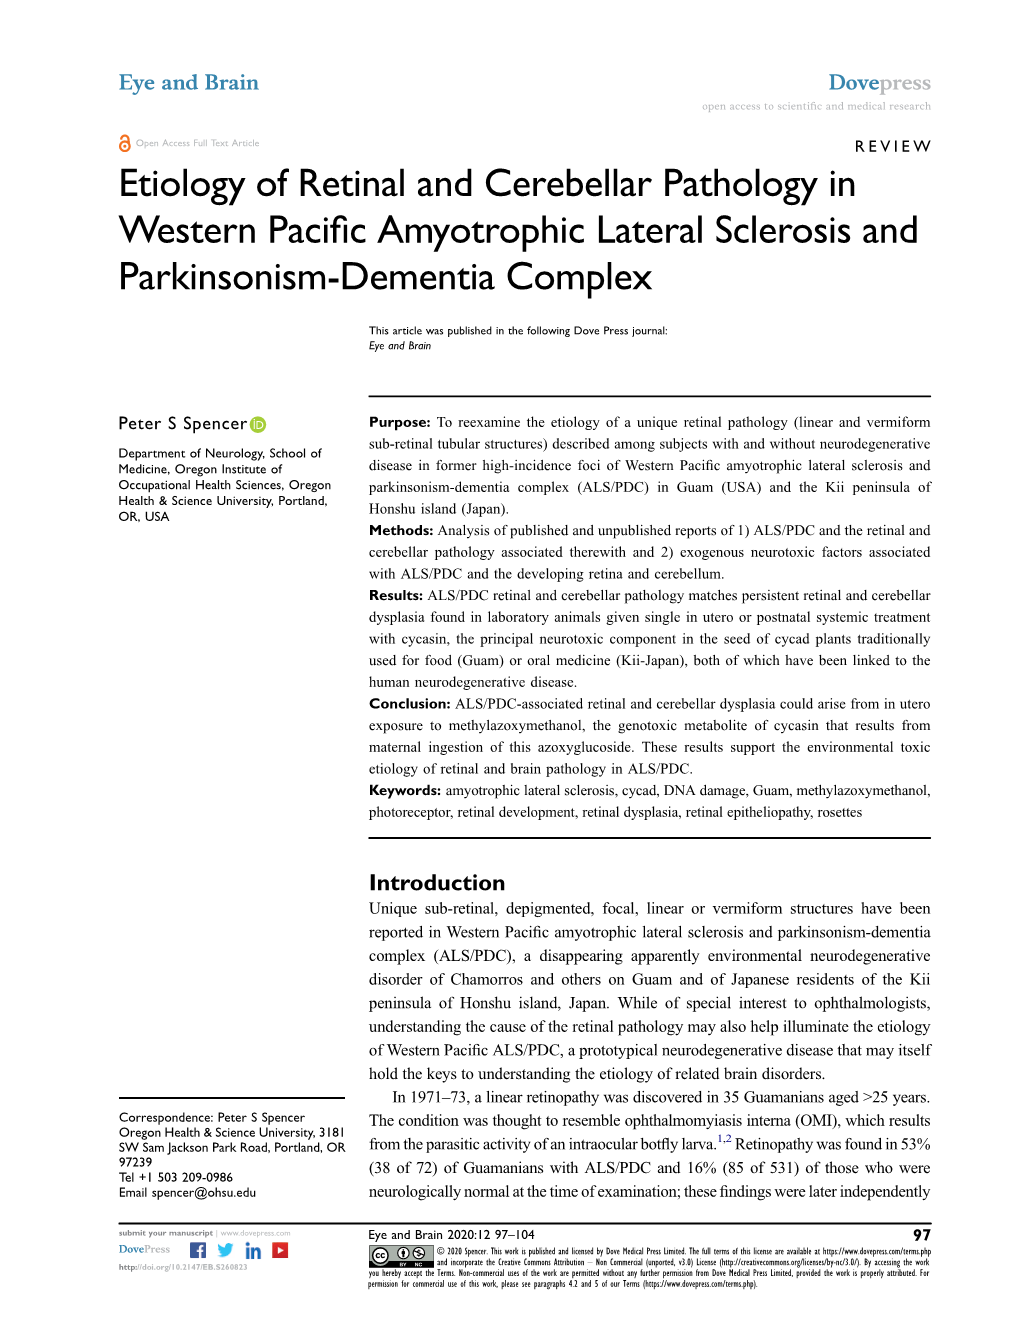 Etiology of Retinal and Cerebellar Pathology in Western Pacific